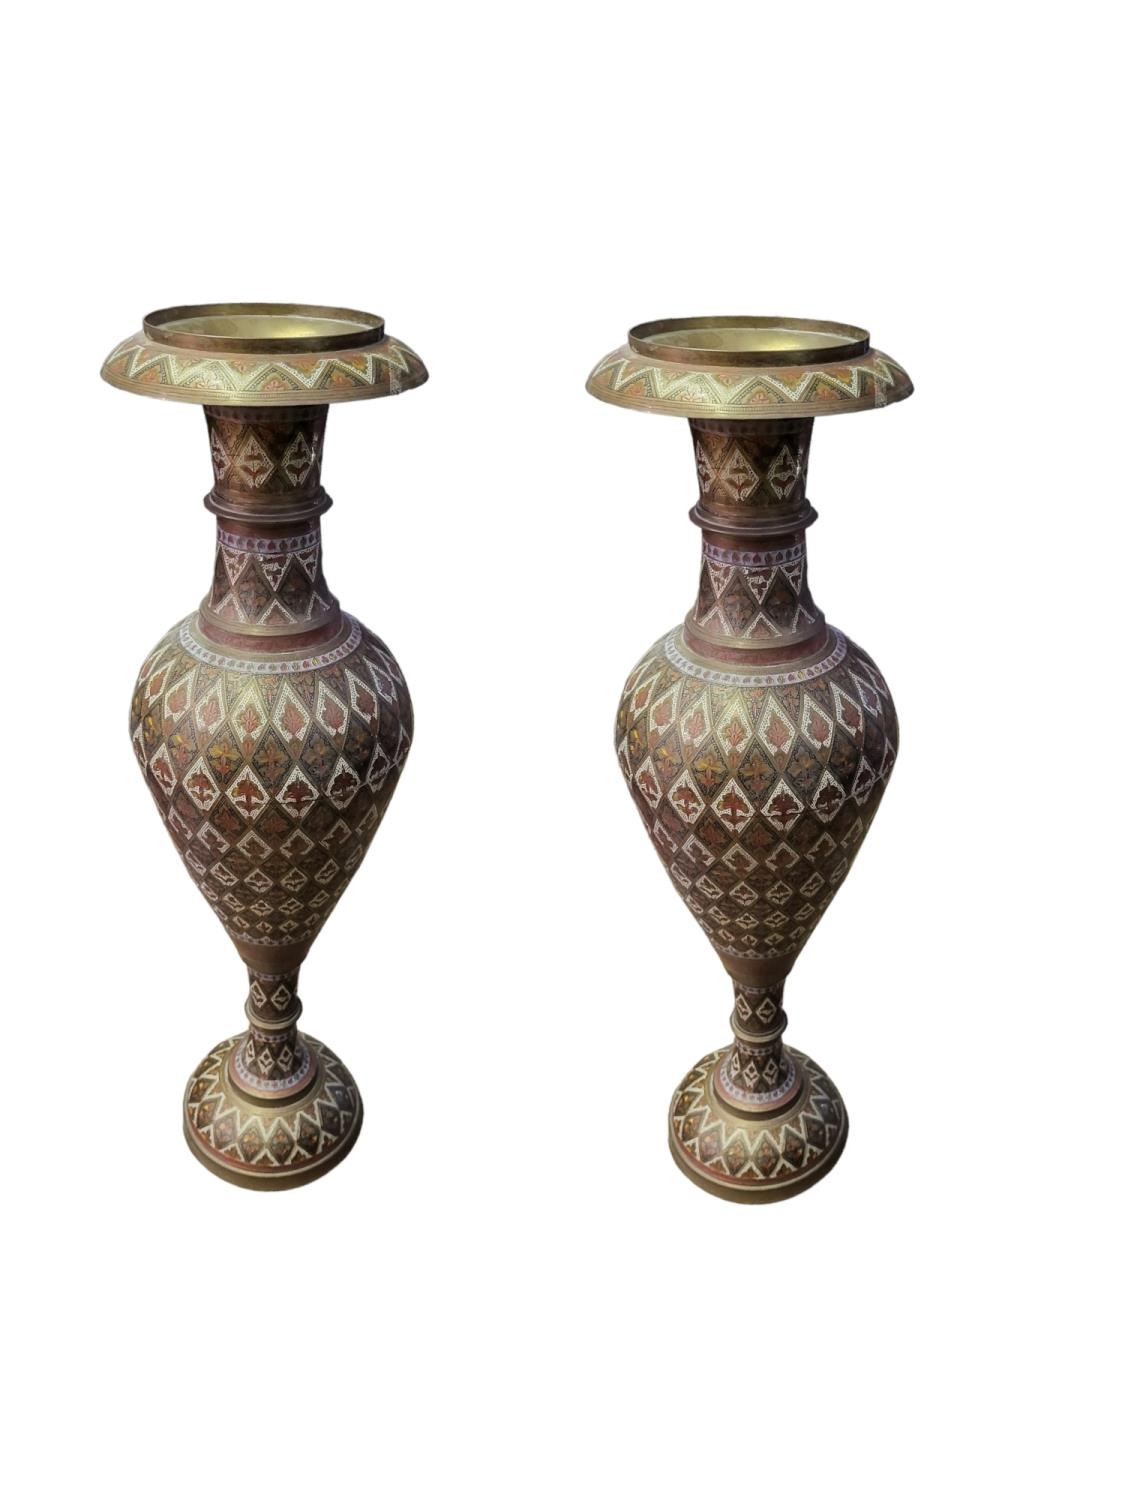 A PAIR OF 20TH CENTURY LARGE INDIAN BRASS AND ENAMEL BALUSTER SHAPED VASES Decorated with